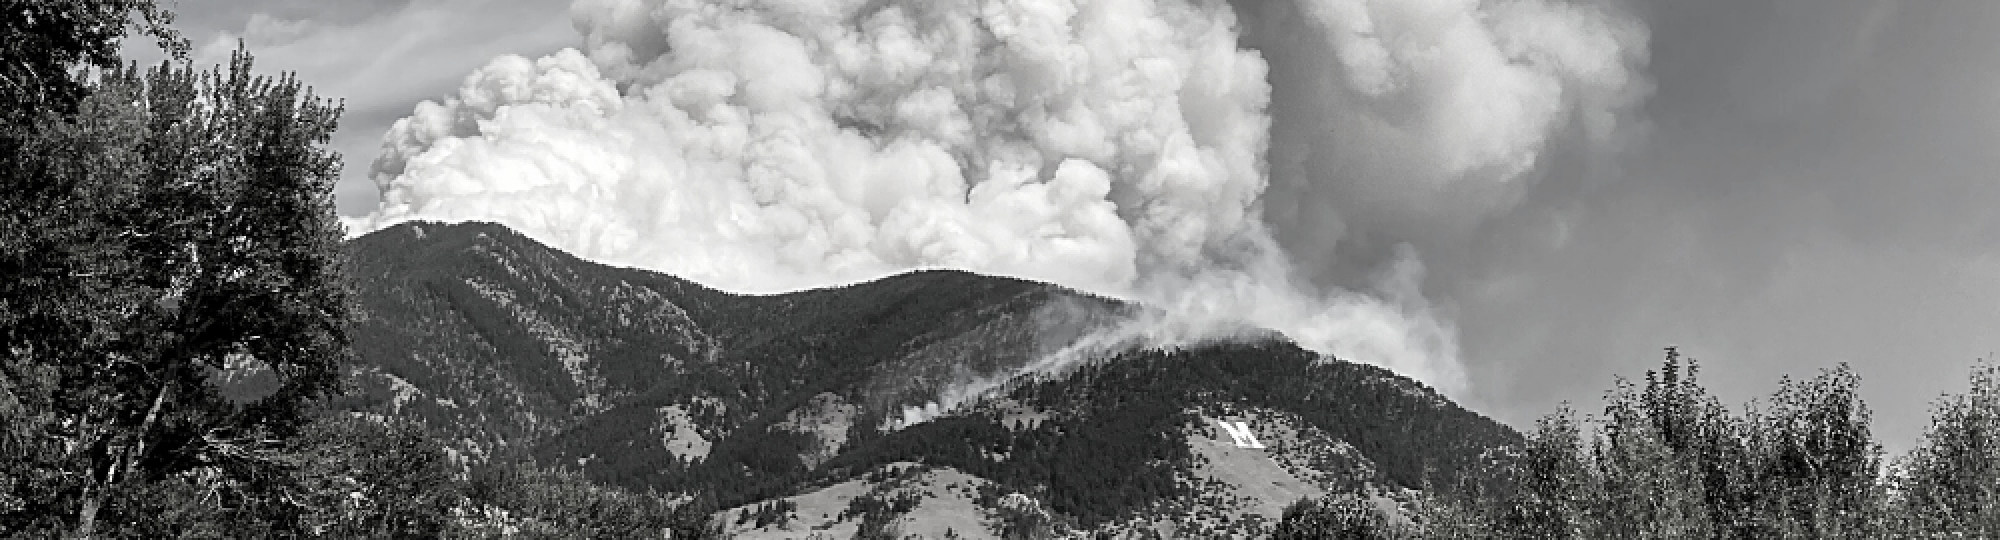 Black and white photo of smoke rising from wildfire in bridger mountains